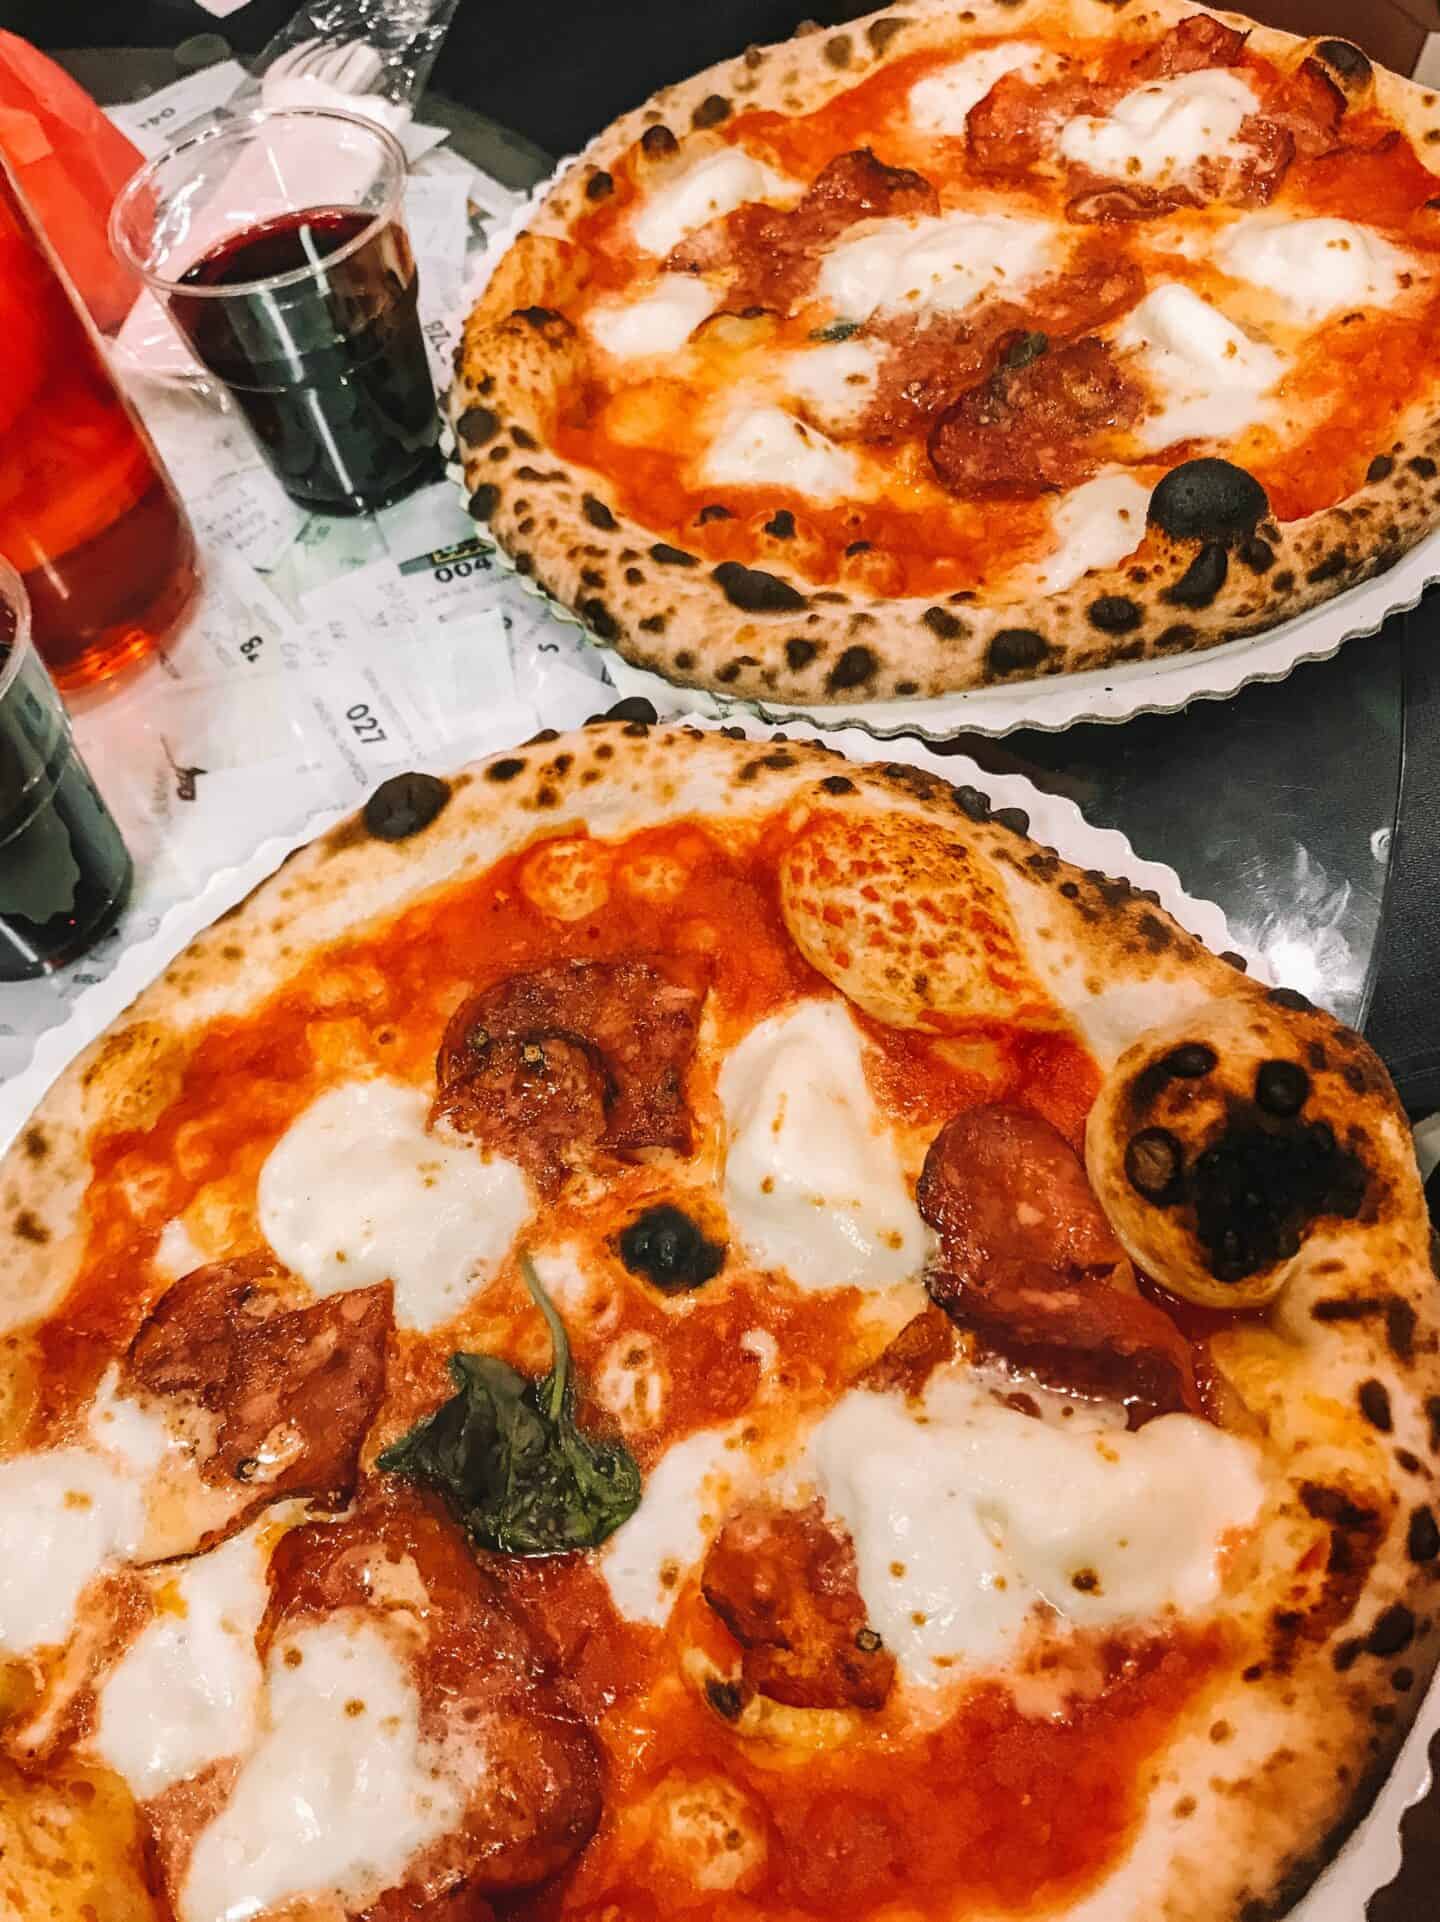 Diavola pizza from Gustapizza, one of the best places to eat pizza in Florence